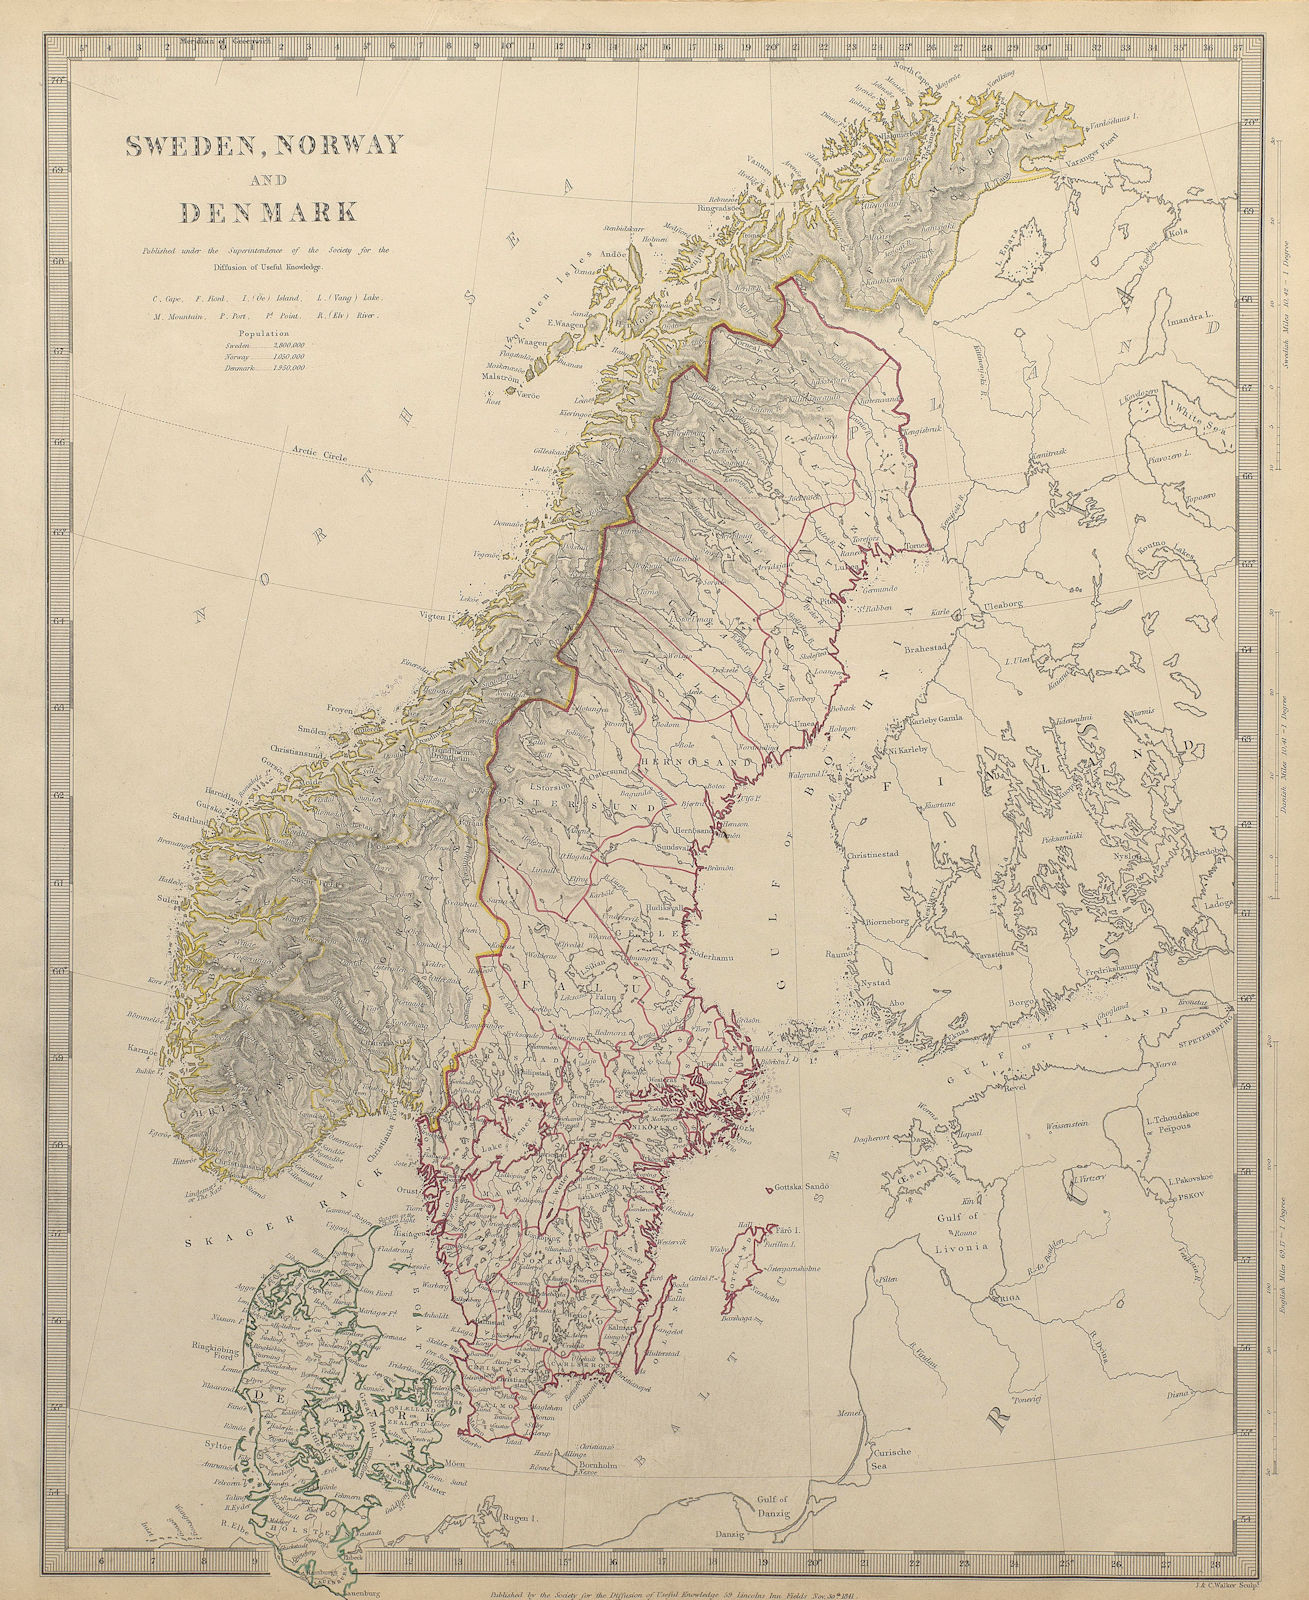 Associate Product SCANDINAVIA. Sweden, Norway, and Denmark. Population table. SDUK 1844 old map